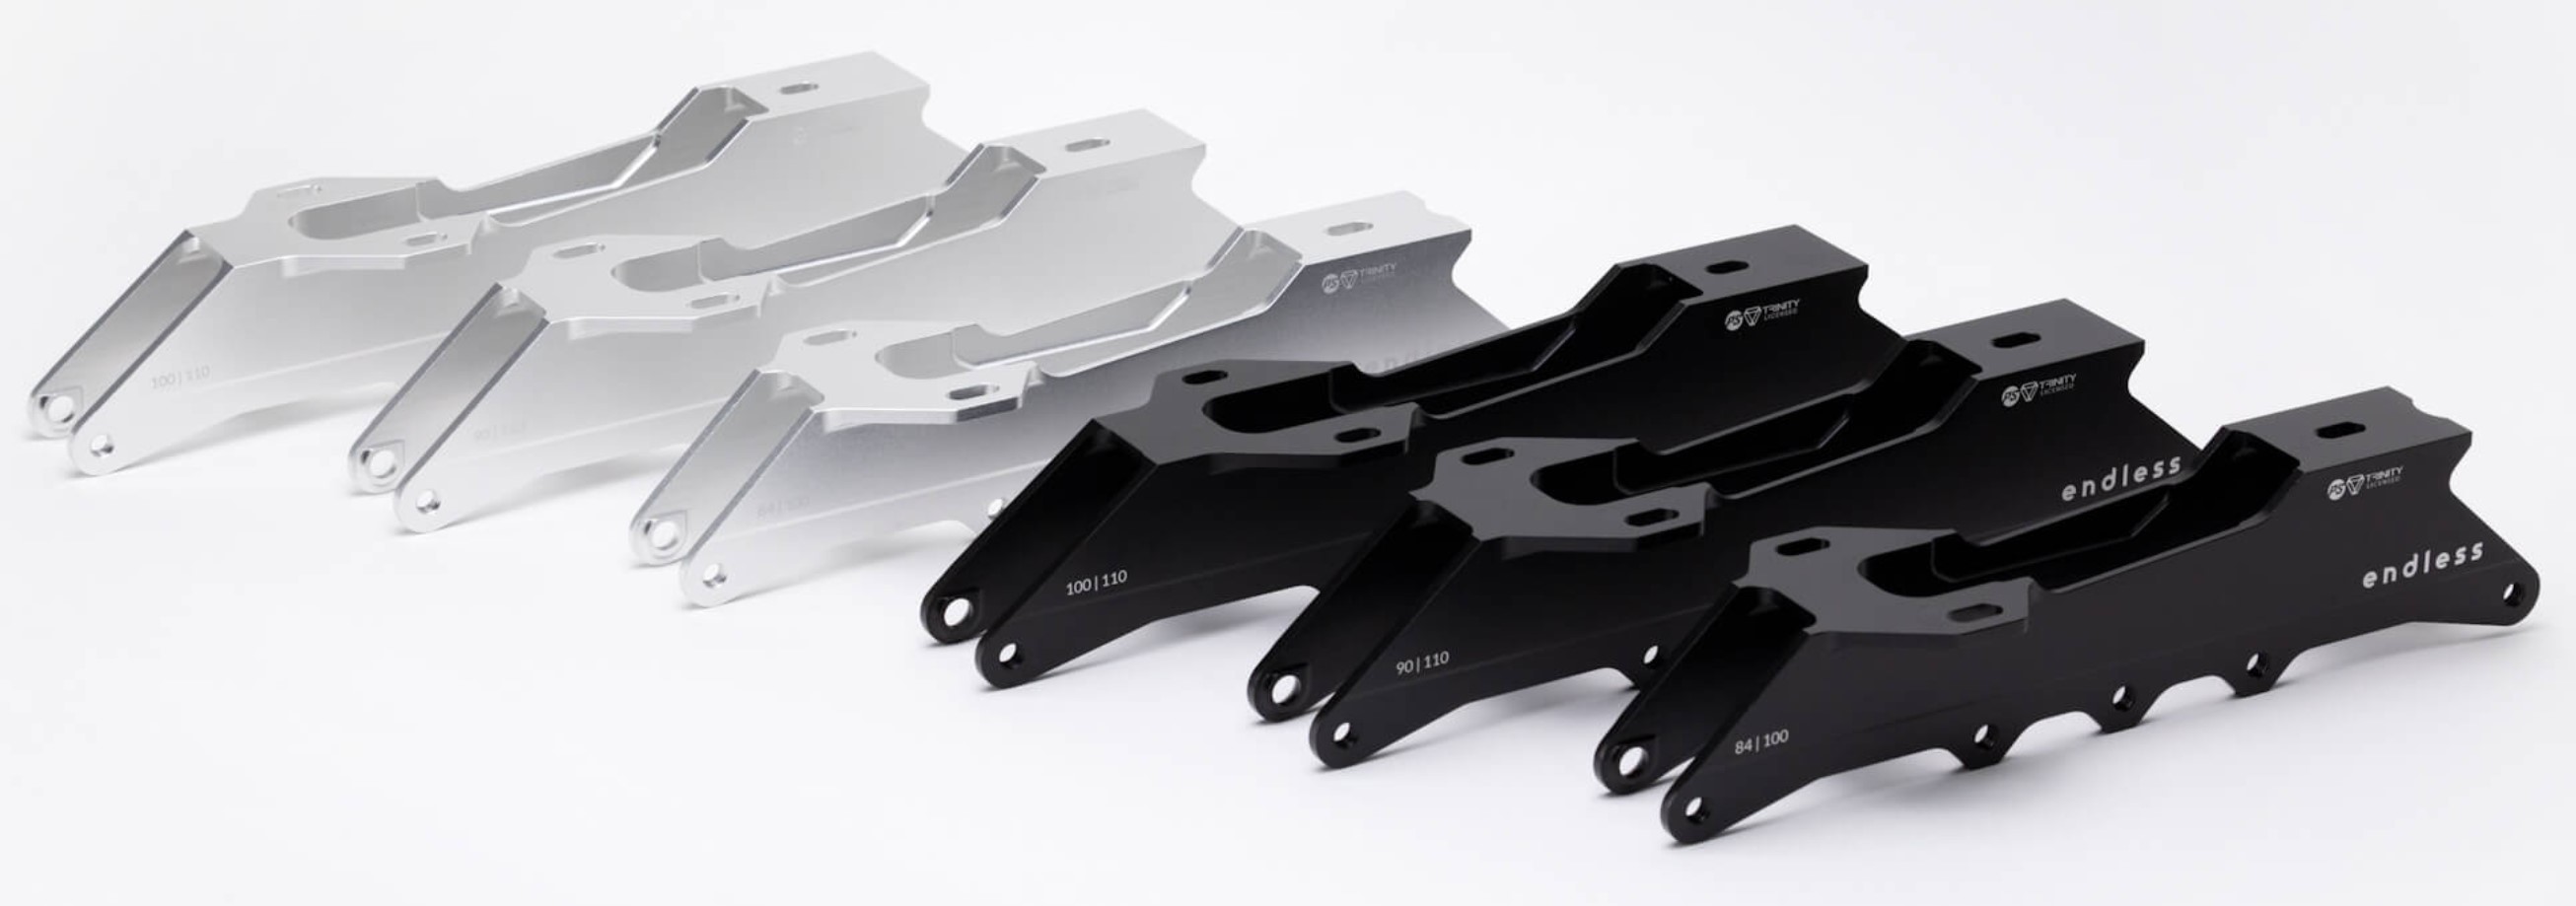 The various flavours of the Endless Trinity inline skate frame